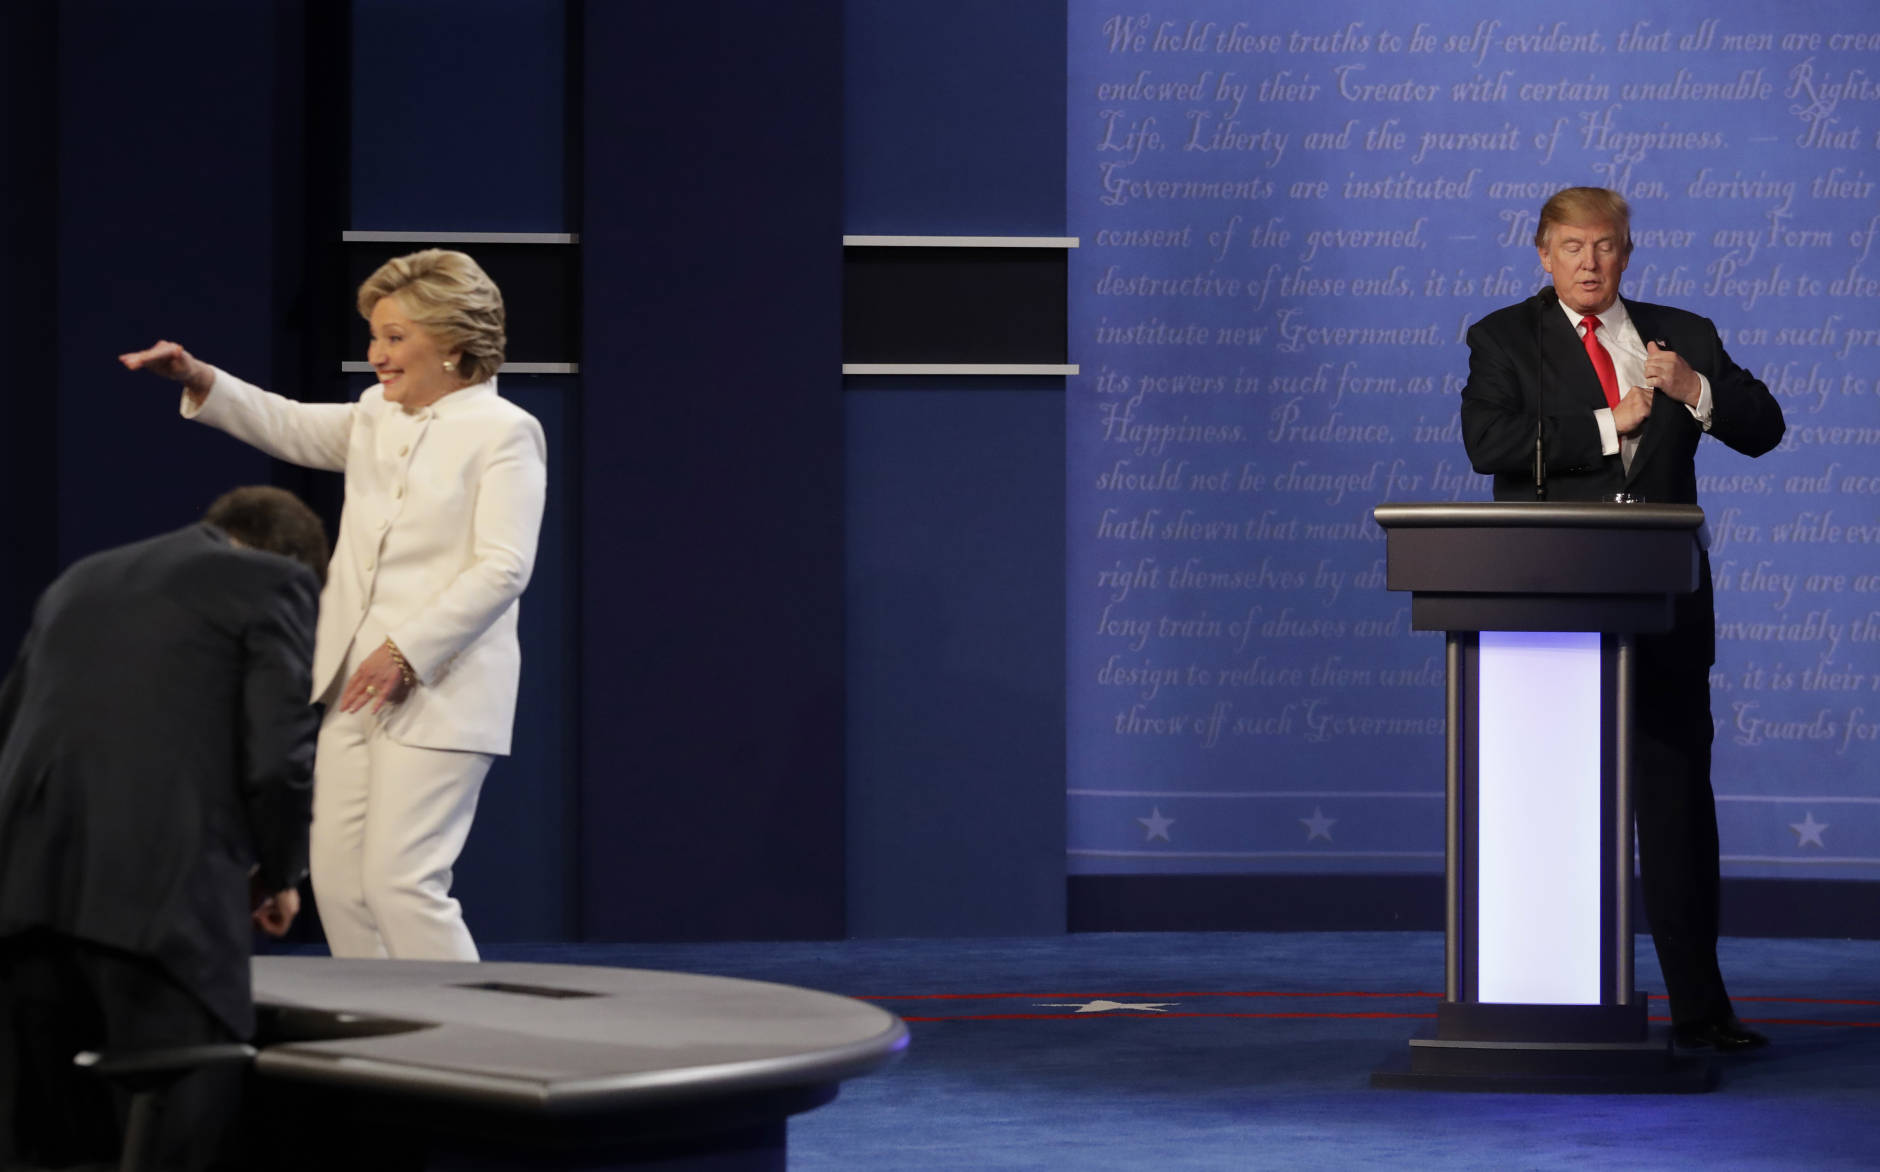 Republican presidential nominee Donald Trump waits behind his podium as Democratic presidential nominee Hillary Clinton makes her way off the stage following the third presidential debate at UNLV in Las Vegas, Wednesday, Oct. 19, 2016. (AP Photo/David Goldman)